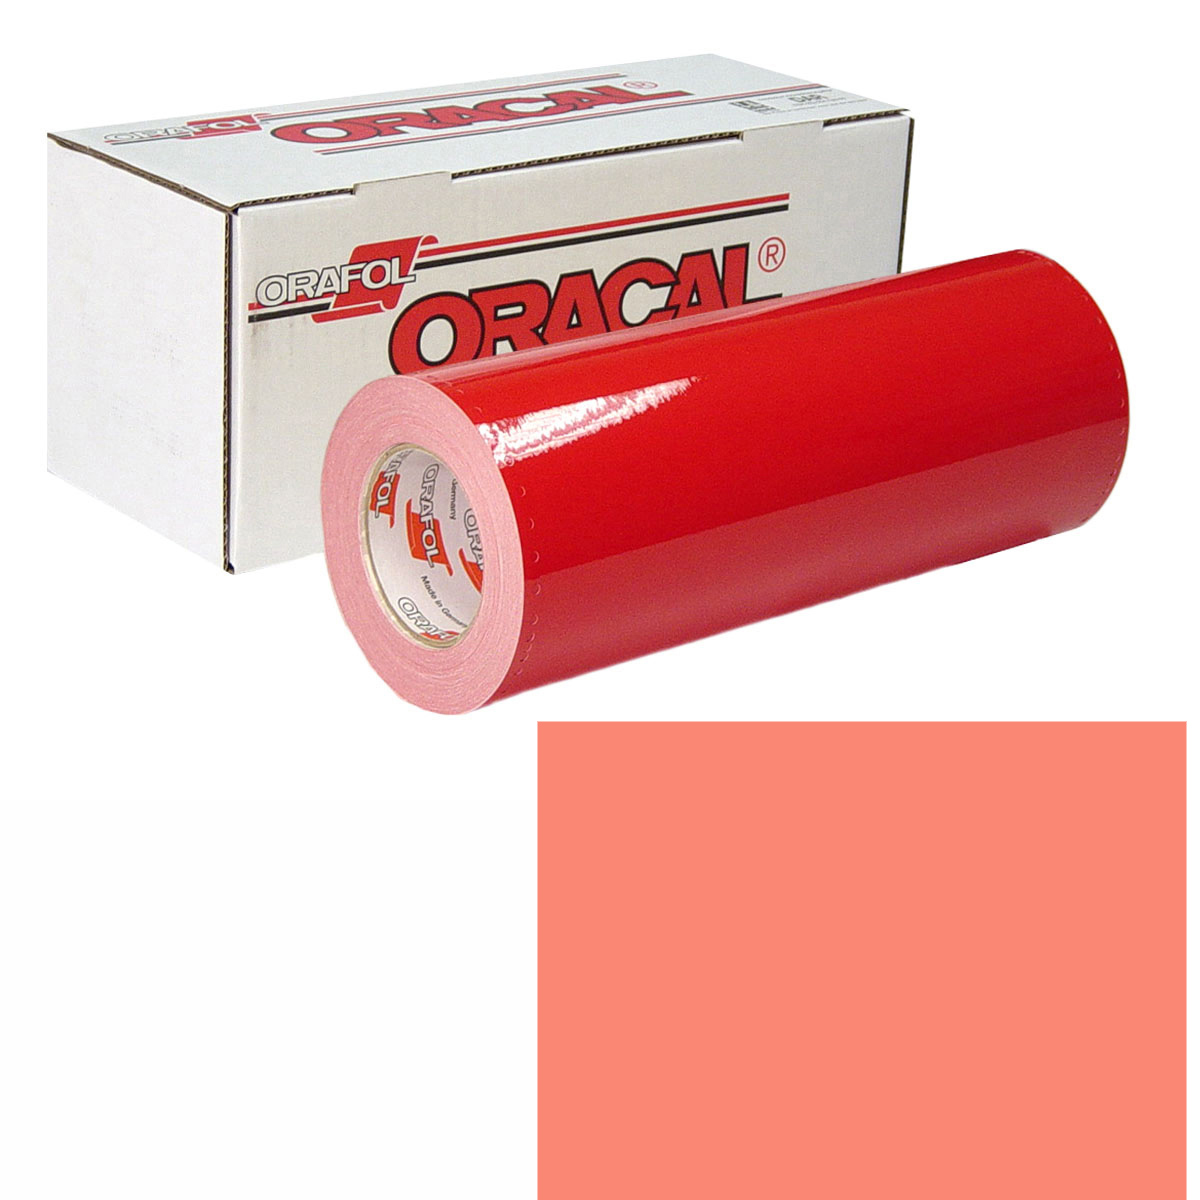 ORACAL 951 30in X 50yd 341 Coral